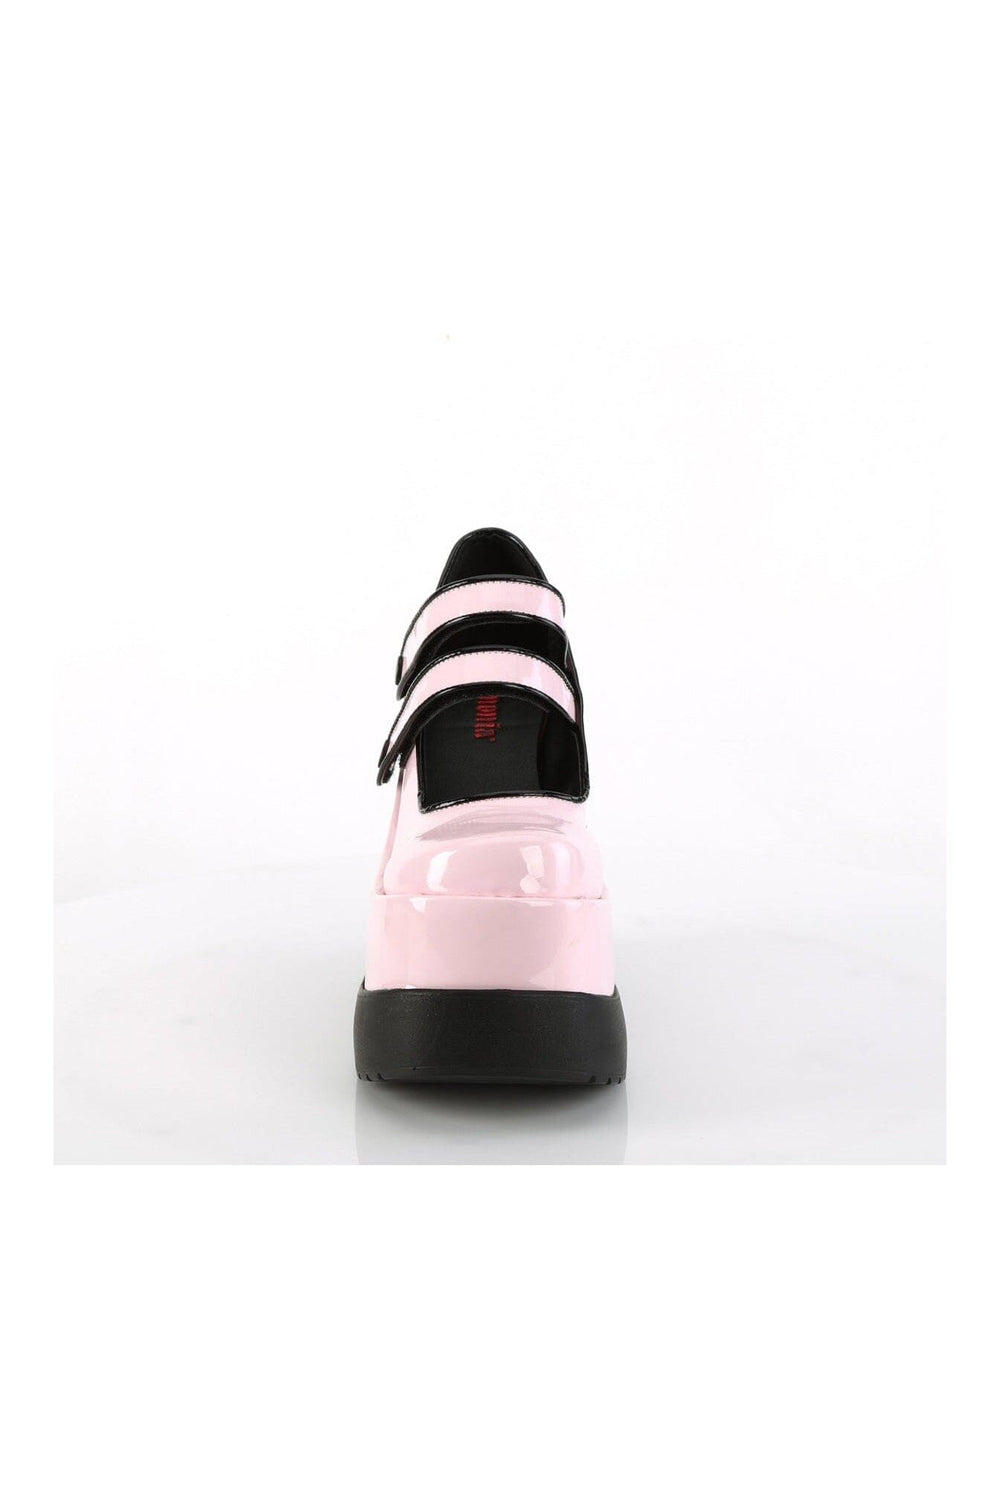 VOID-37 Pink Hologram Patent Mary Janes-Mary Janes-Demonia-SEXYSHOES.COM